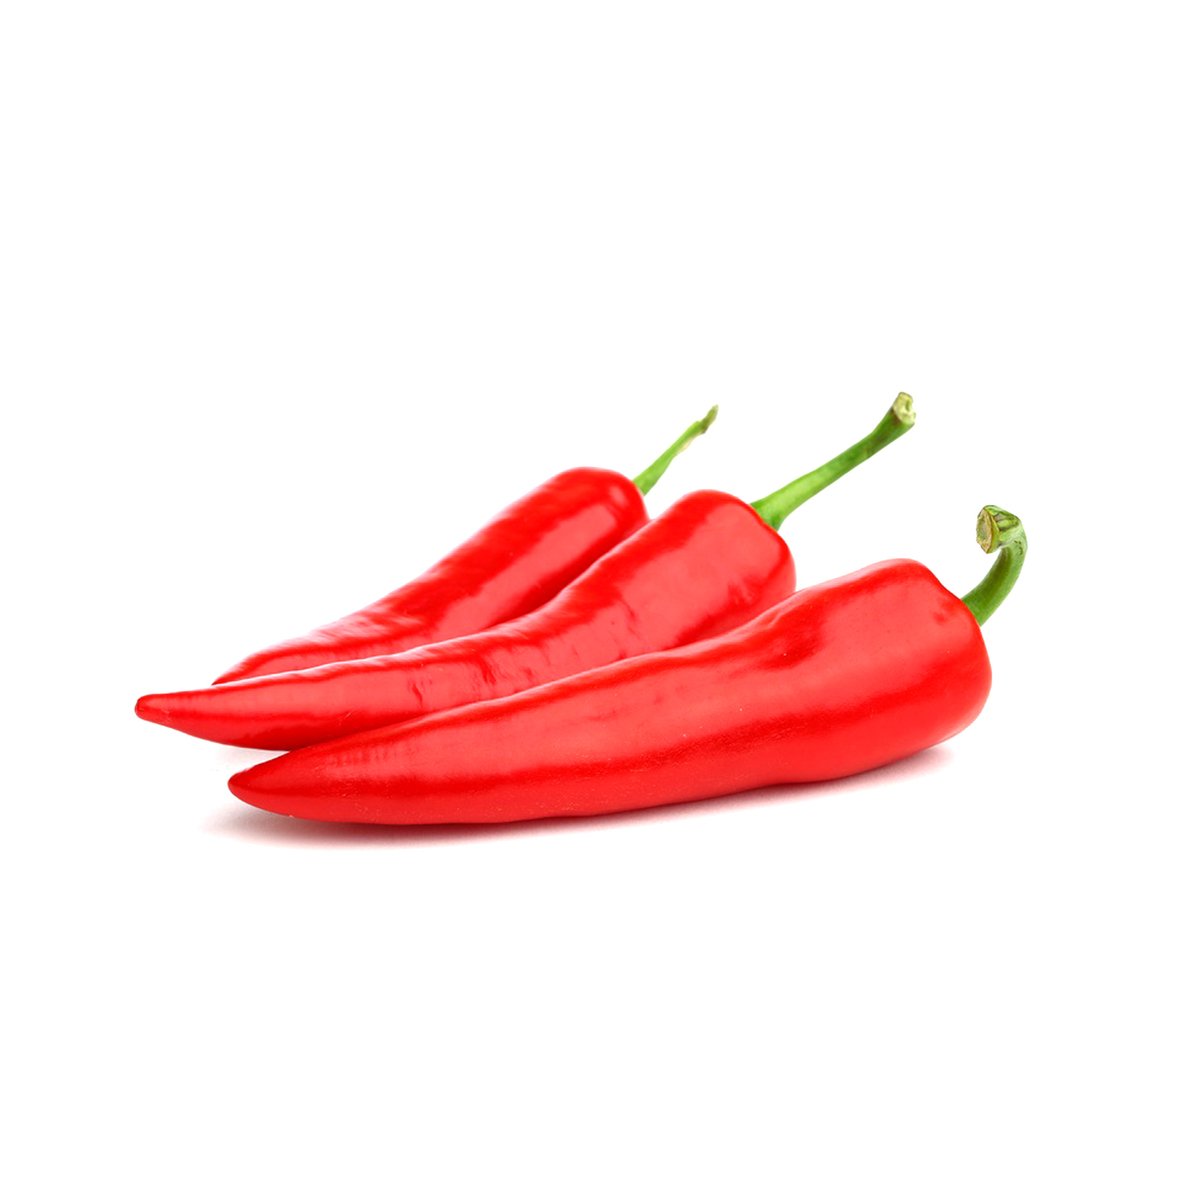 Chilli Red Imperial 300g Approx Weight